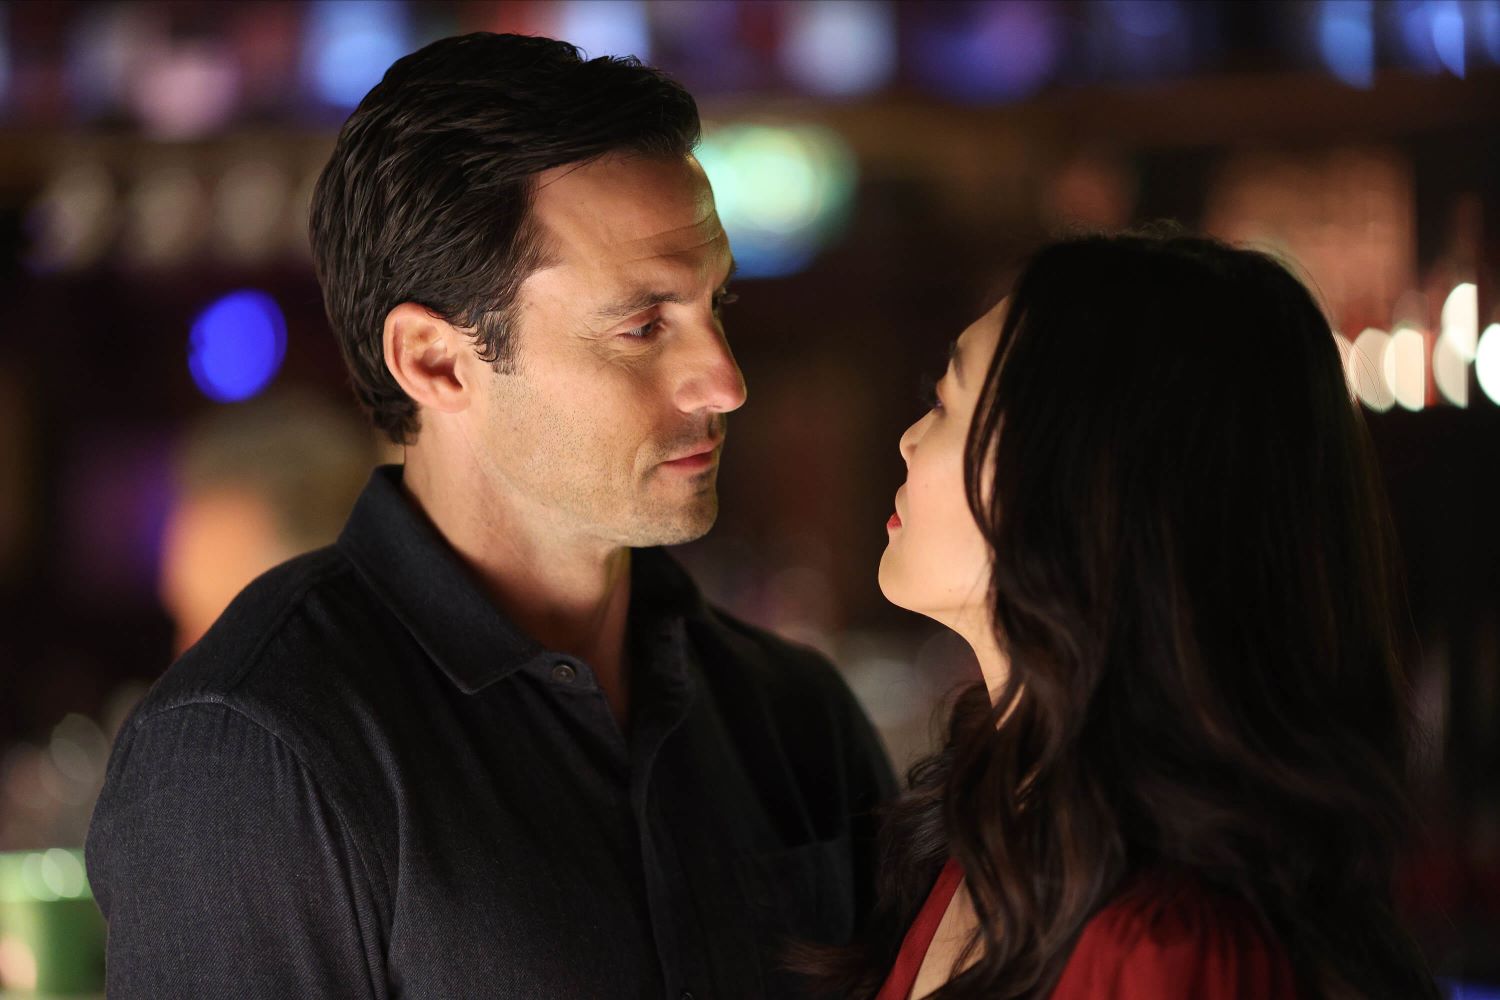 Milo Ventimiglia as Charlie Nicoletti and Catherine Haena Kim as Emma Hill in 'The Company You Keep' Season 1 Episode 3, 'Against All Odds.' Charlie wears a dark gray sweater, and Emma wears a red long-sleeved dress.